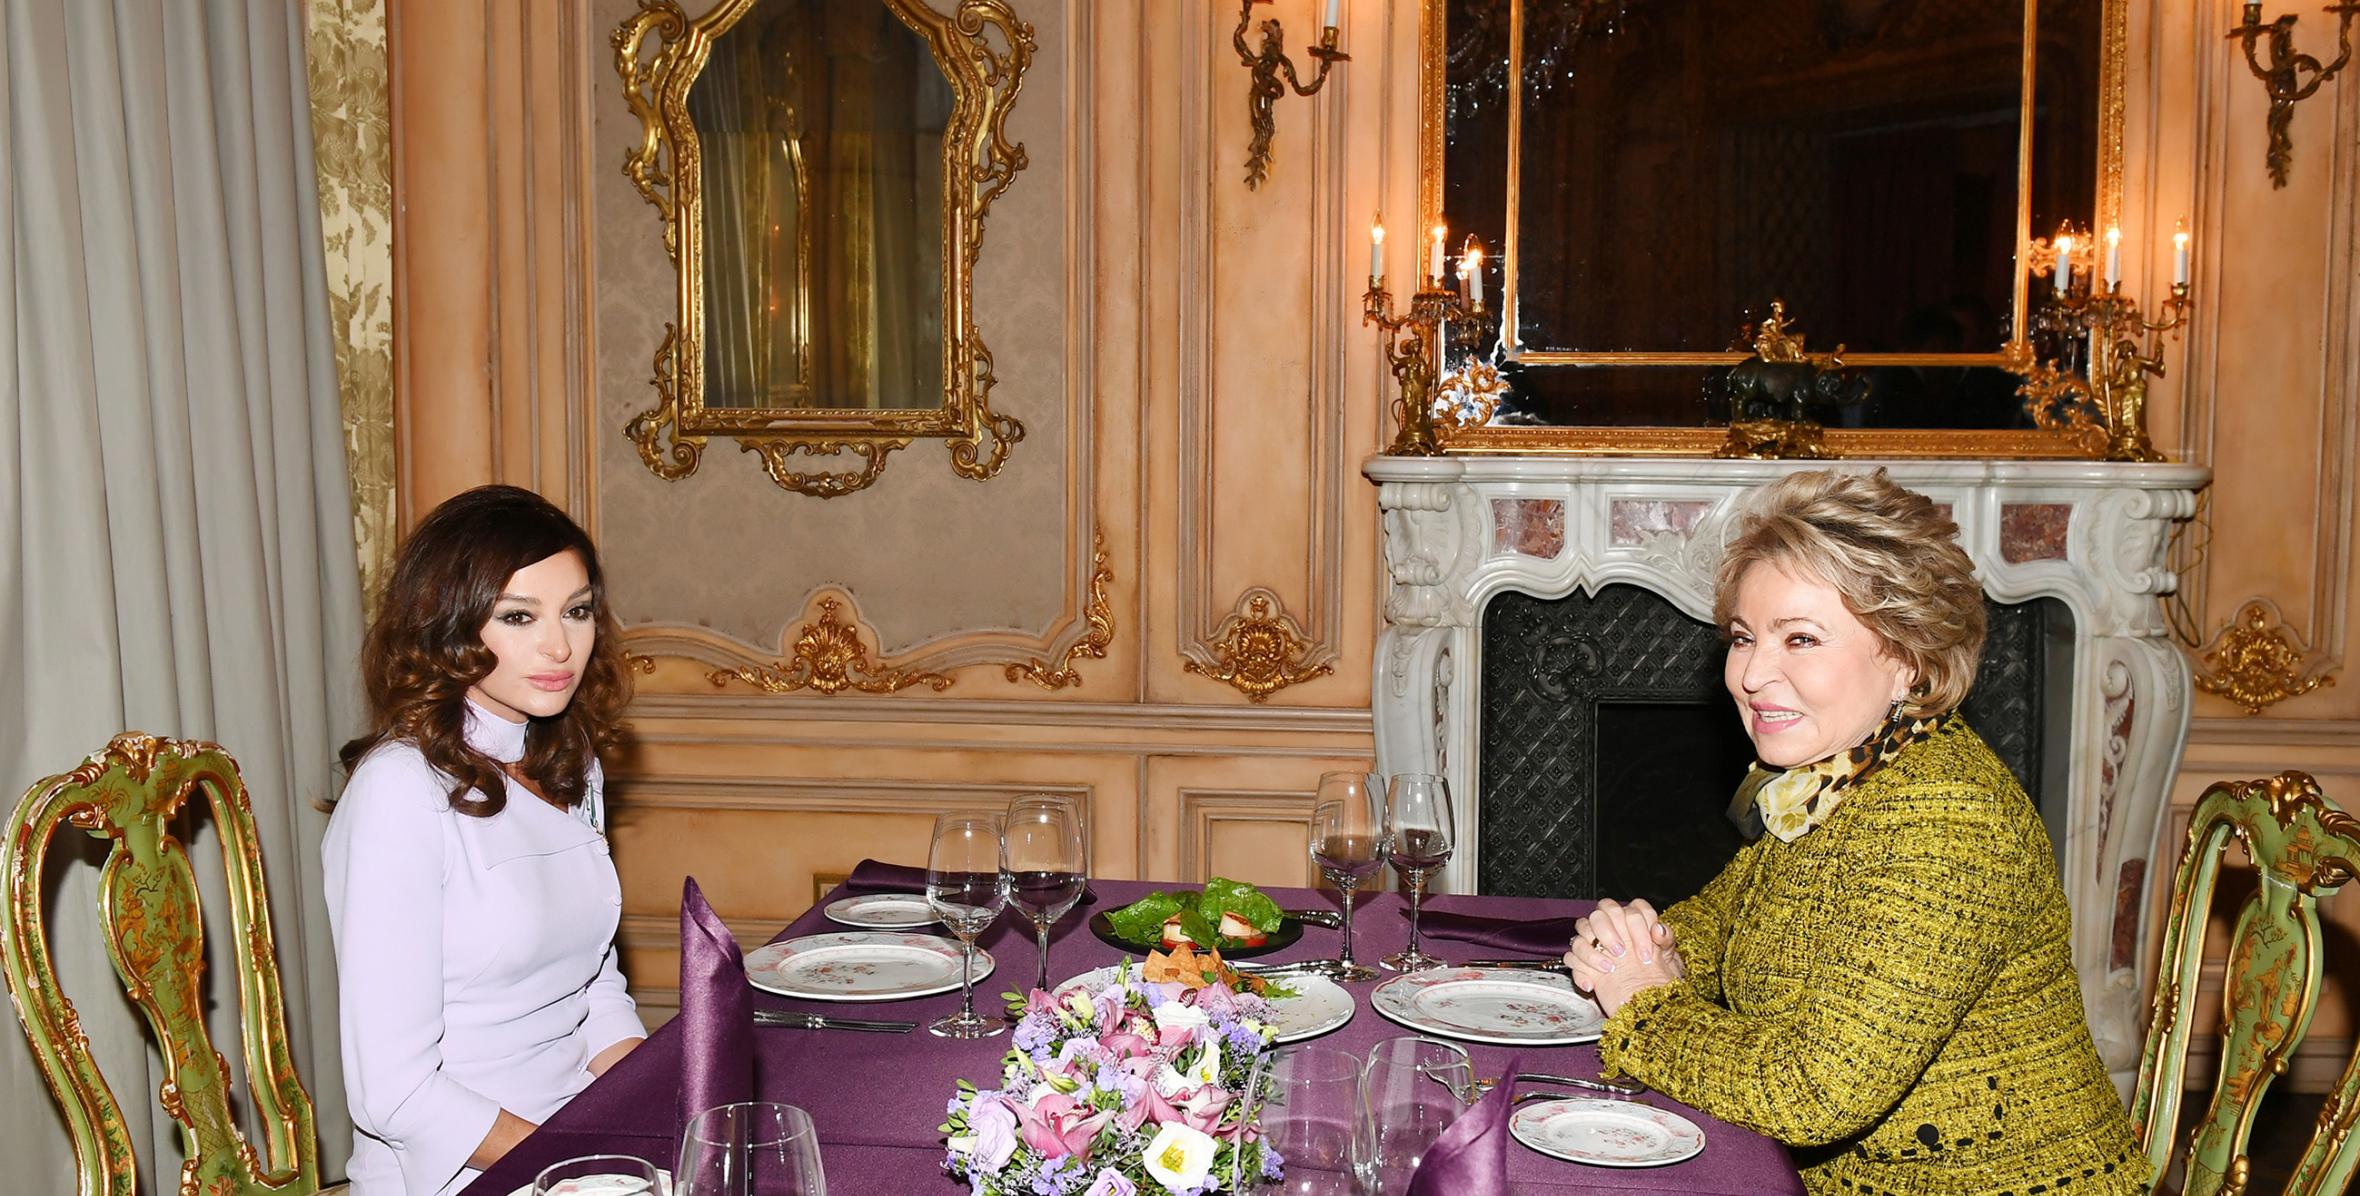 First Vice-President Mehriban Aliyeva had joint dinner with Chairperson of Federation Council of Federal Assembly of Russia